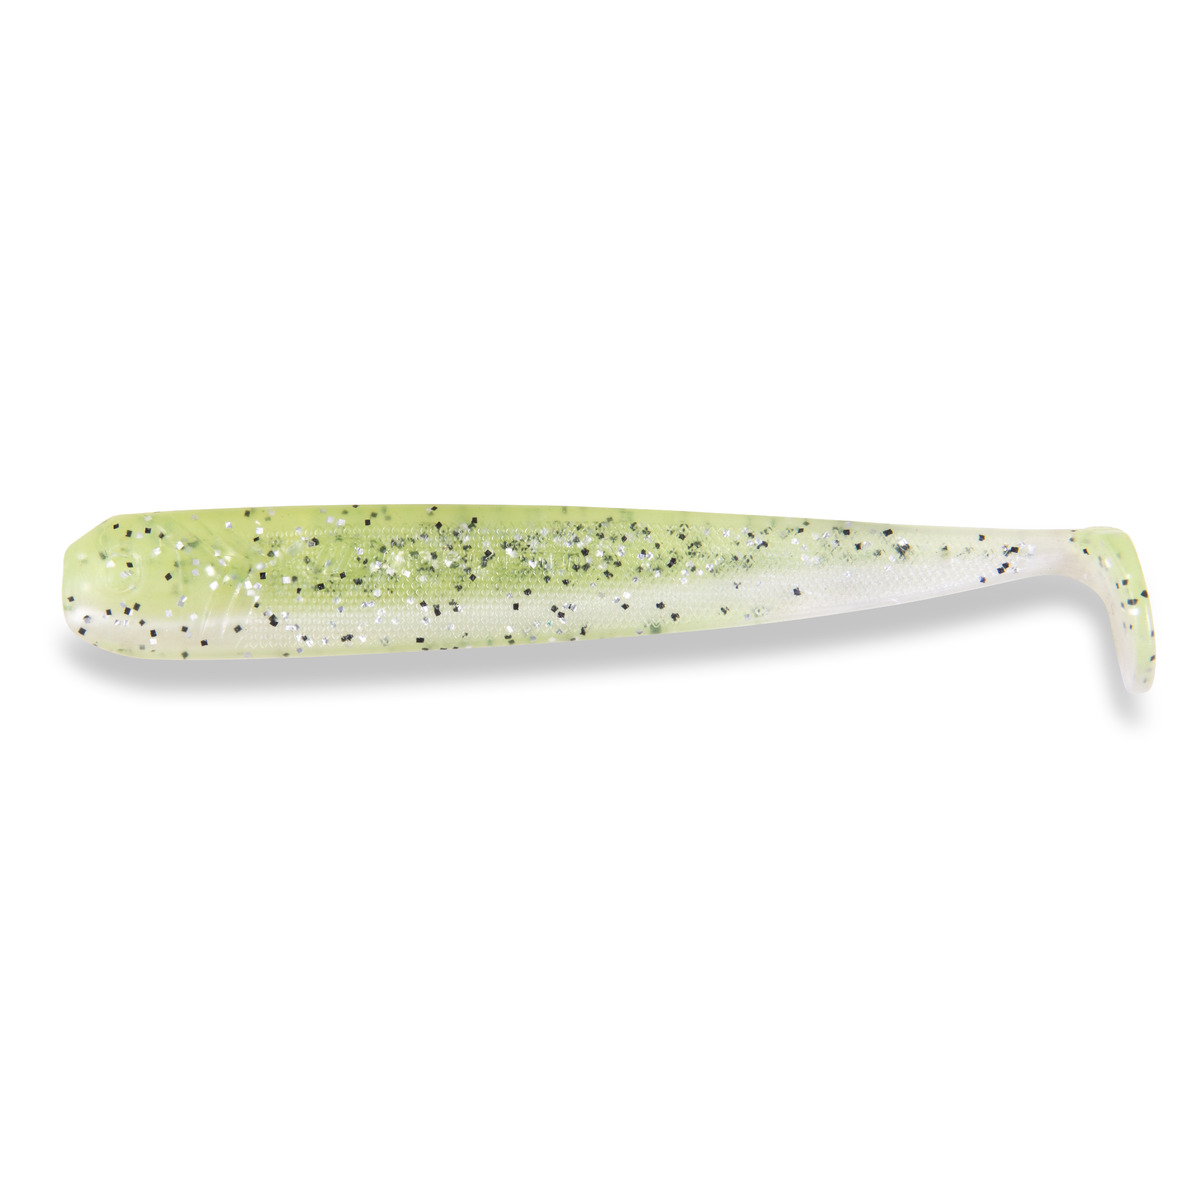 Iron Claw Moby Long Shad 2.0 - SPL LUM